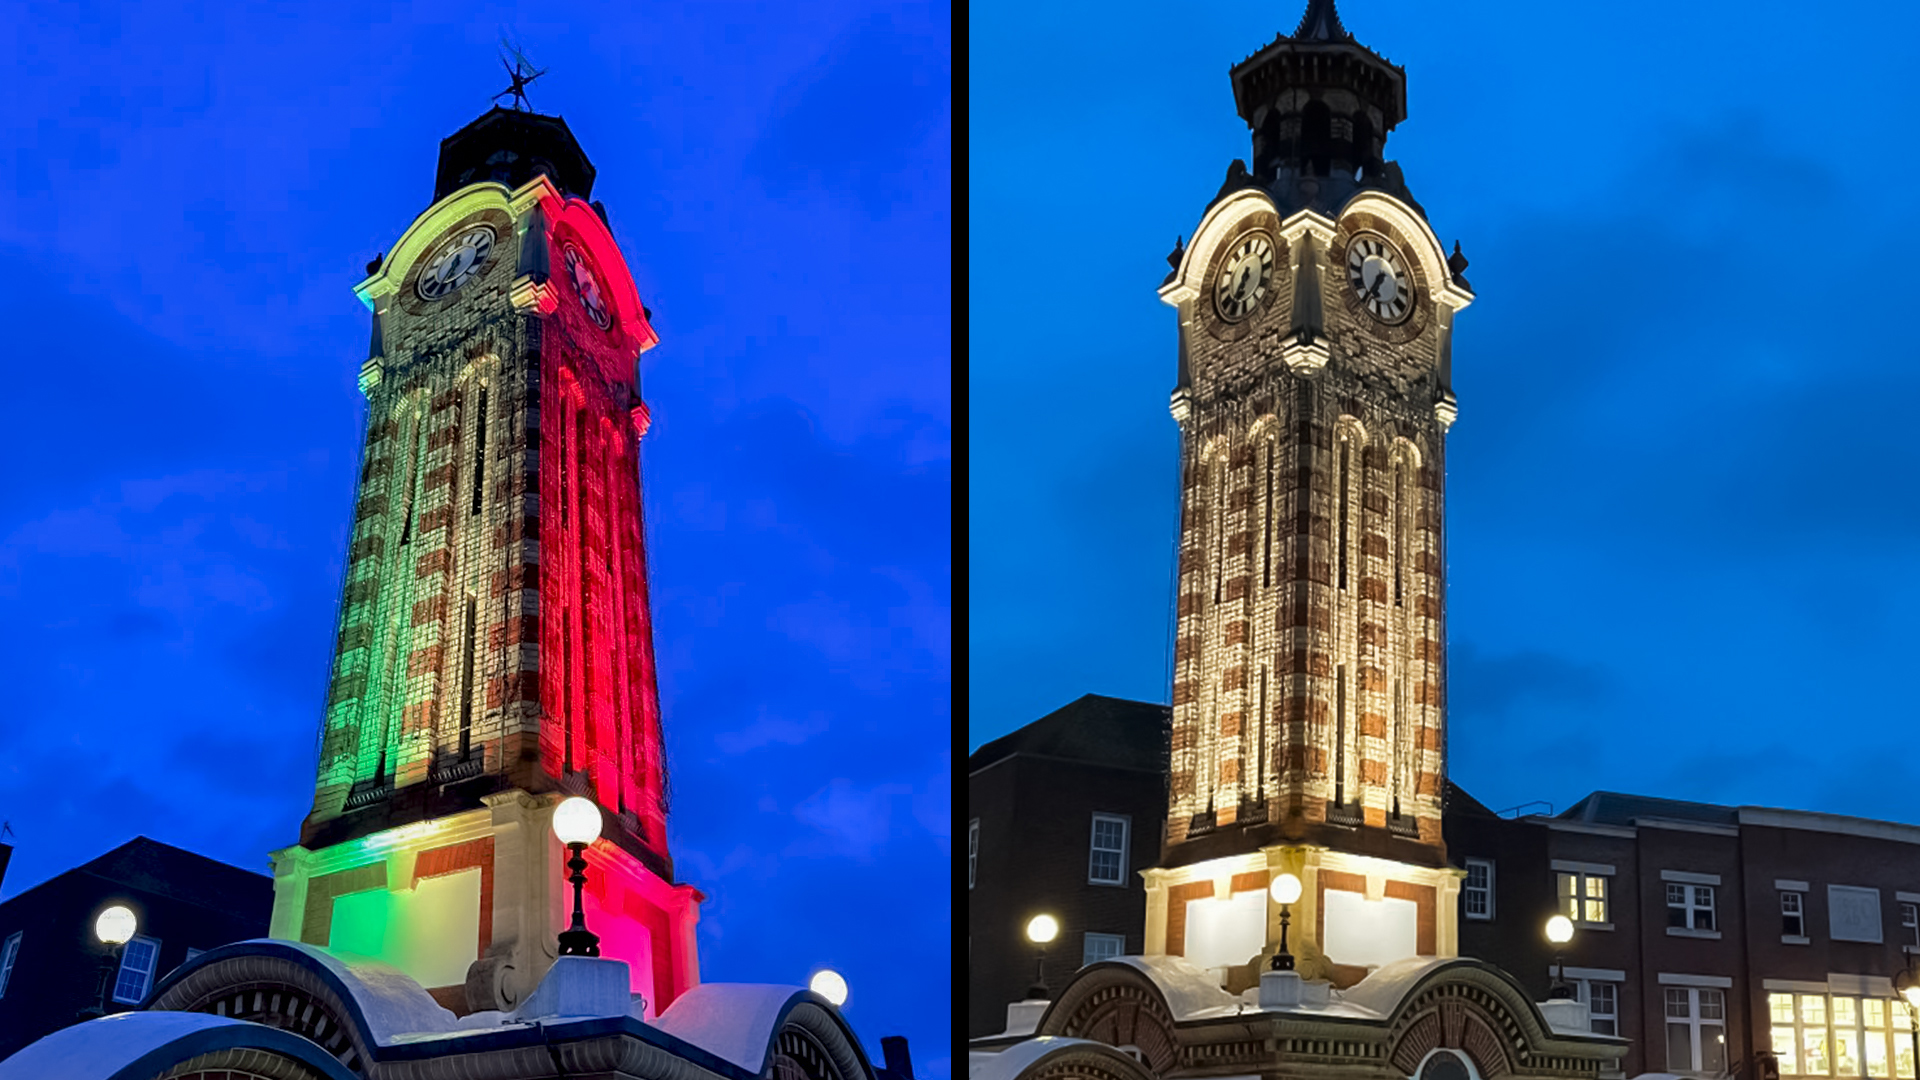 Epsom Clock Tower Gets LED Upgrade with Prolights
